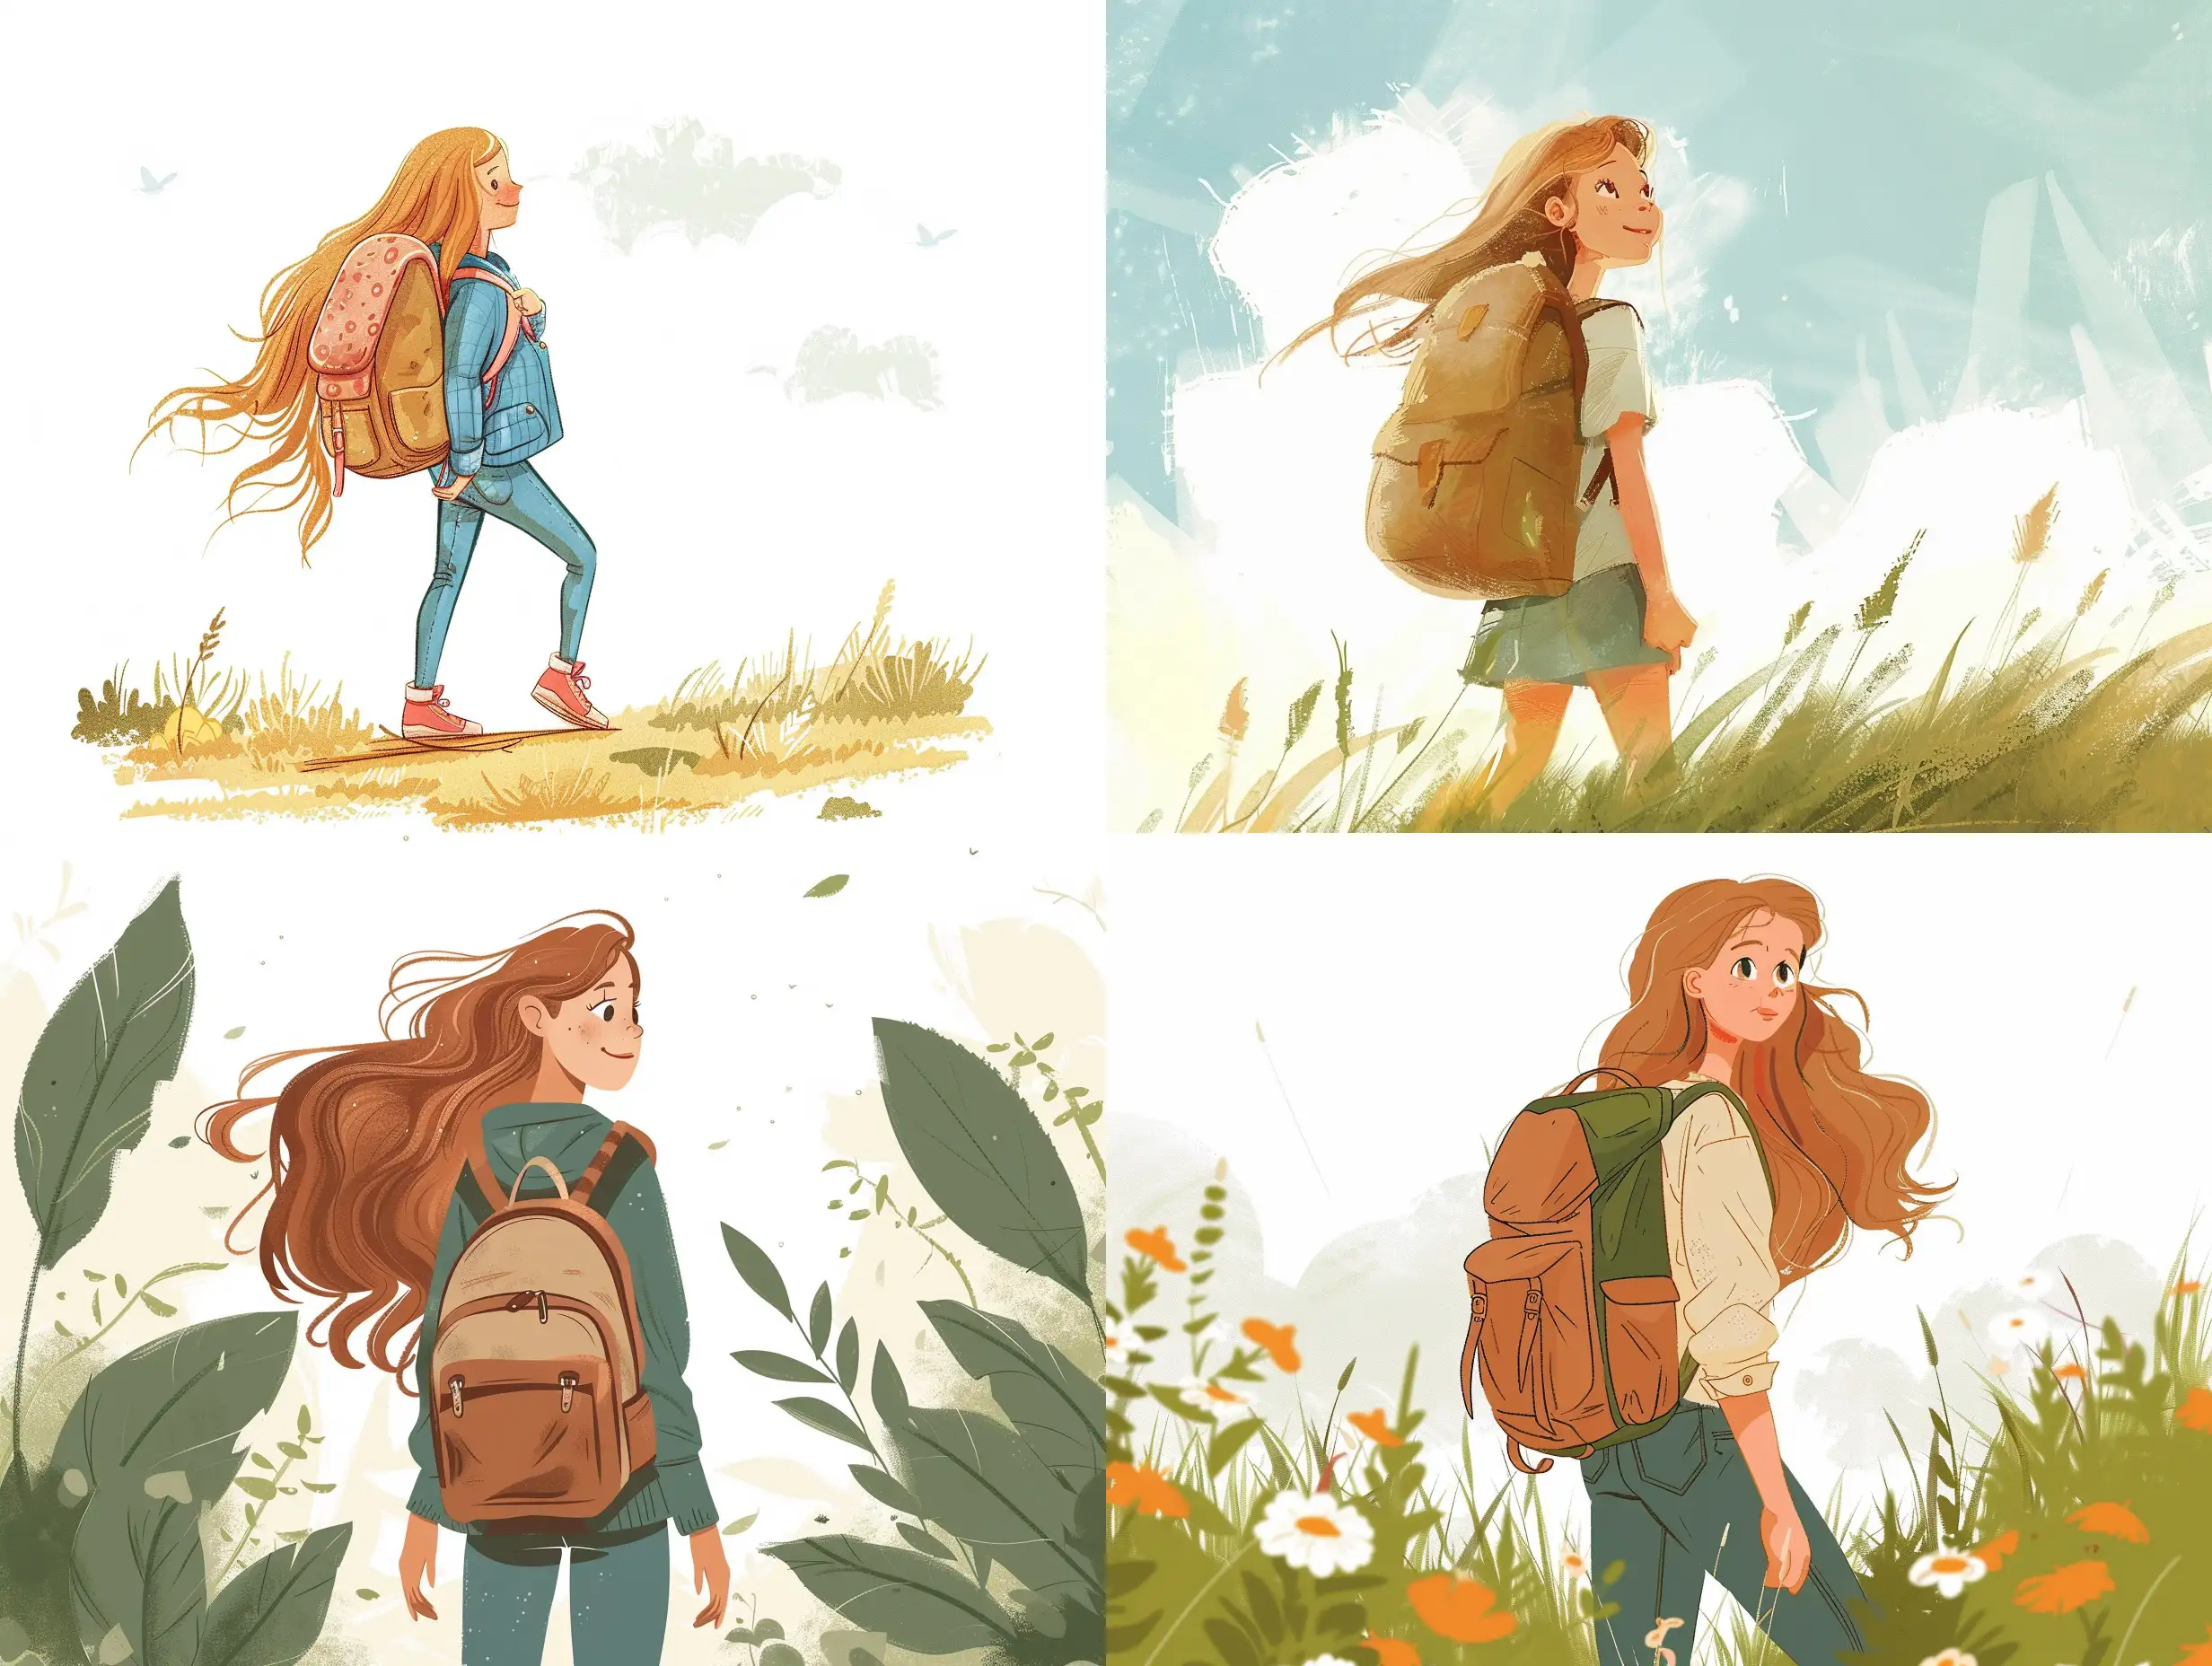 Illustration like a Disney fairytale about 7-years girl with light brown long hair who travels with her backpack